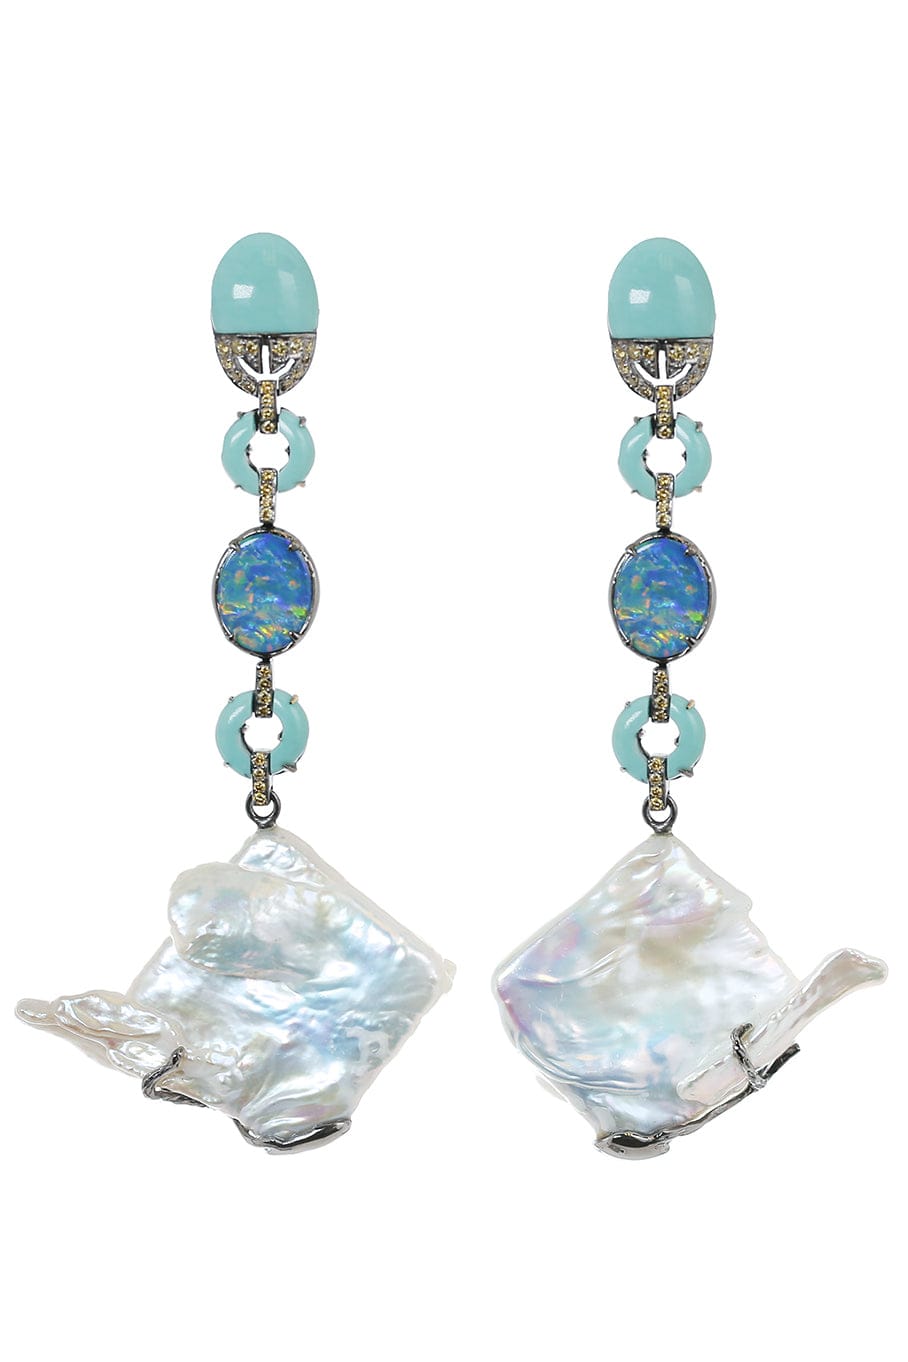 WENDY YUE-Pearl and Turquoise Drop Earrings-WHITE GOLD